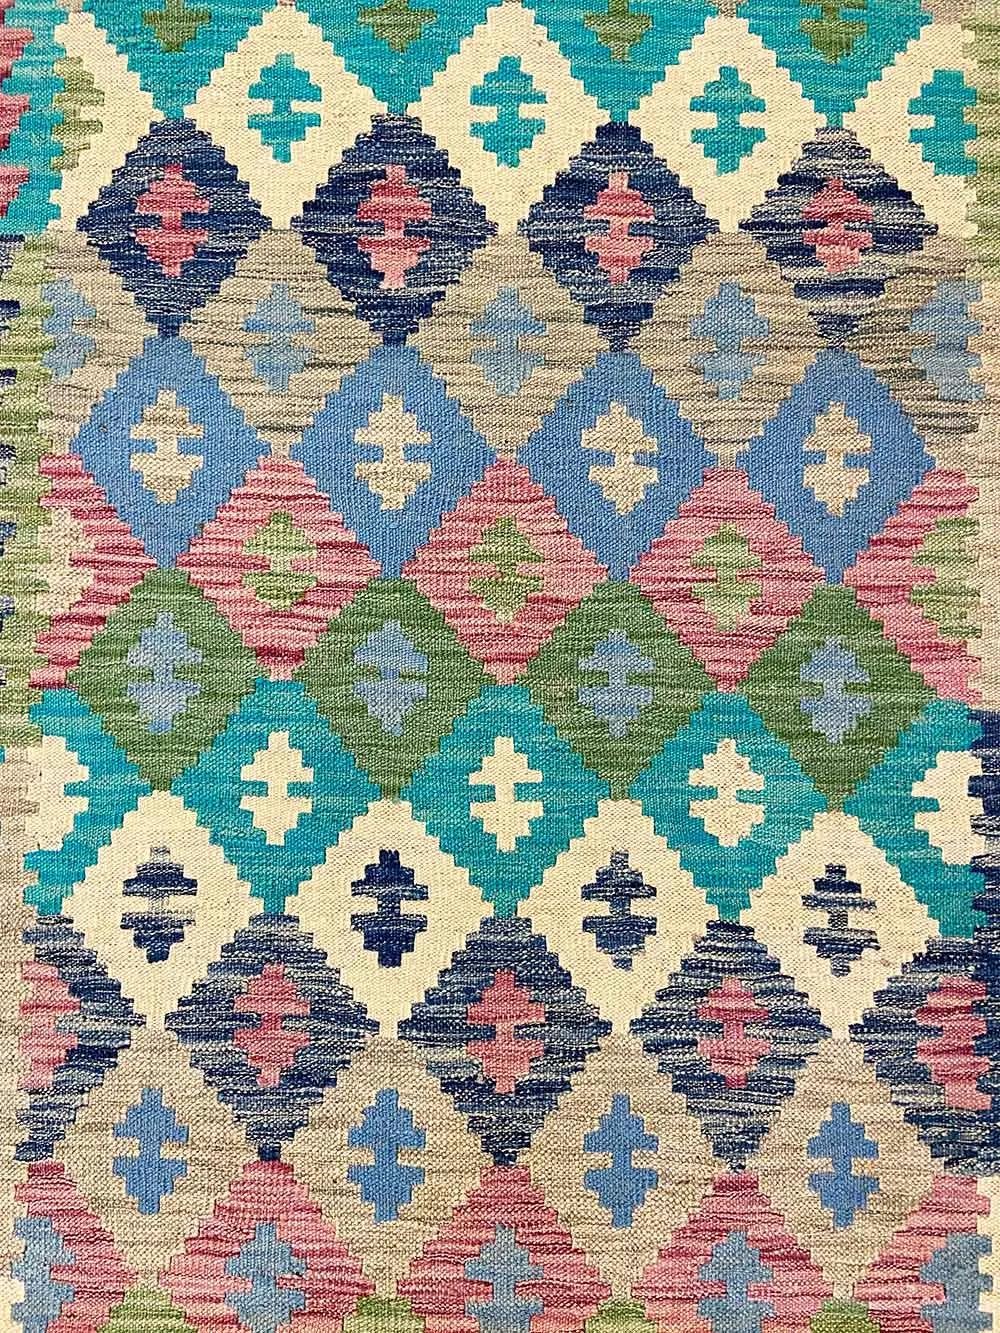 Hand-Woven All Wool Colorful Kilim Runner 2′ 10″ x 9′ 7″ For Sale